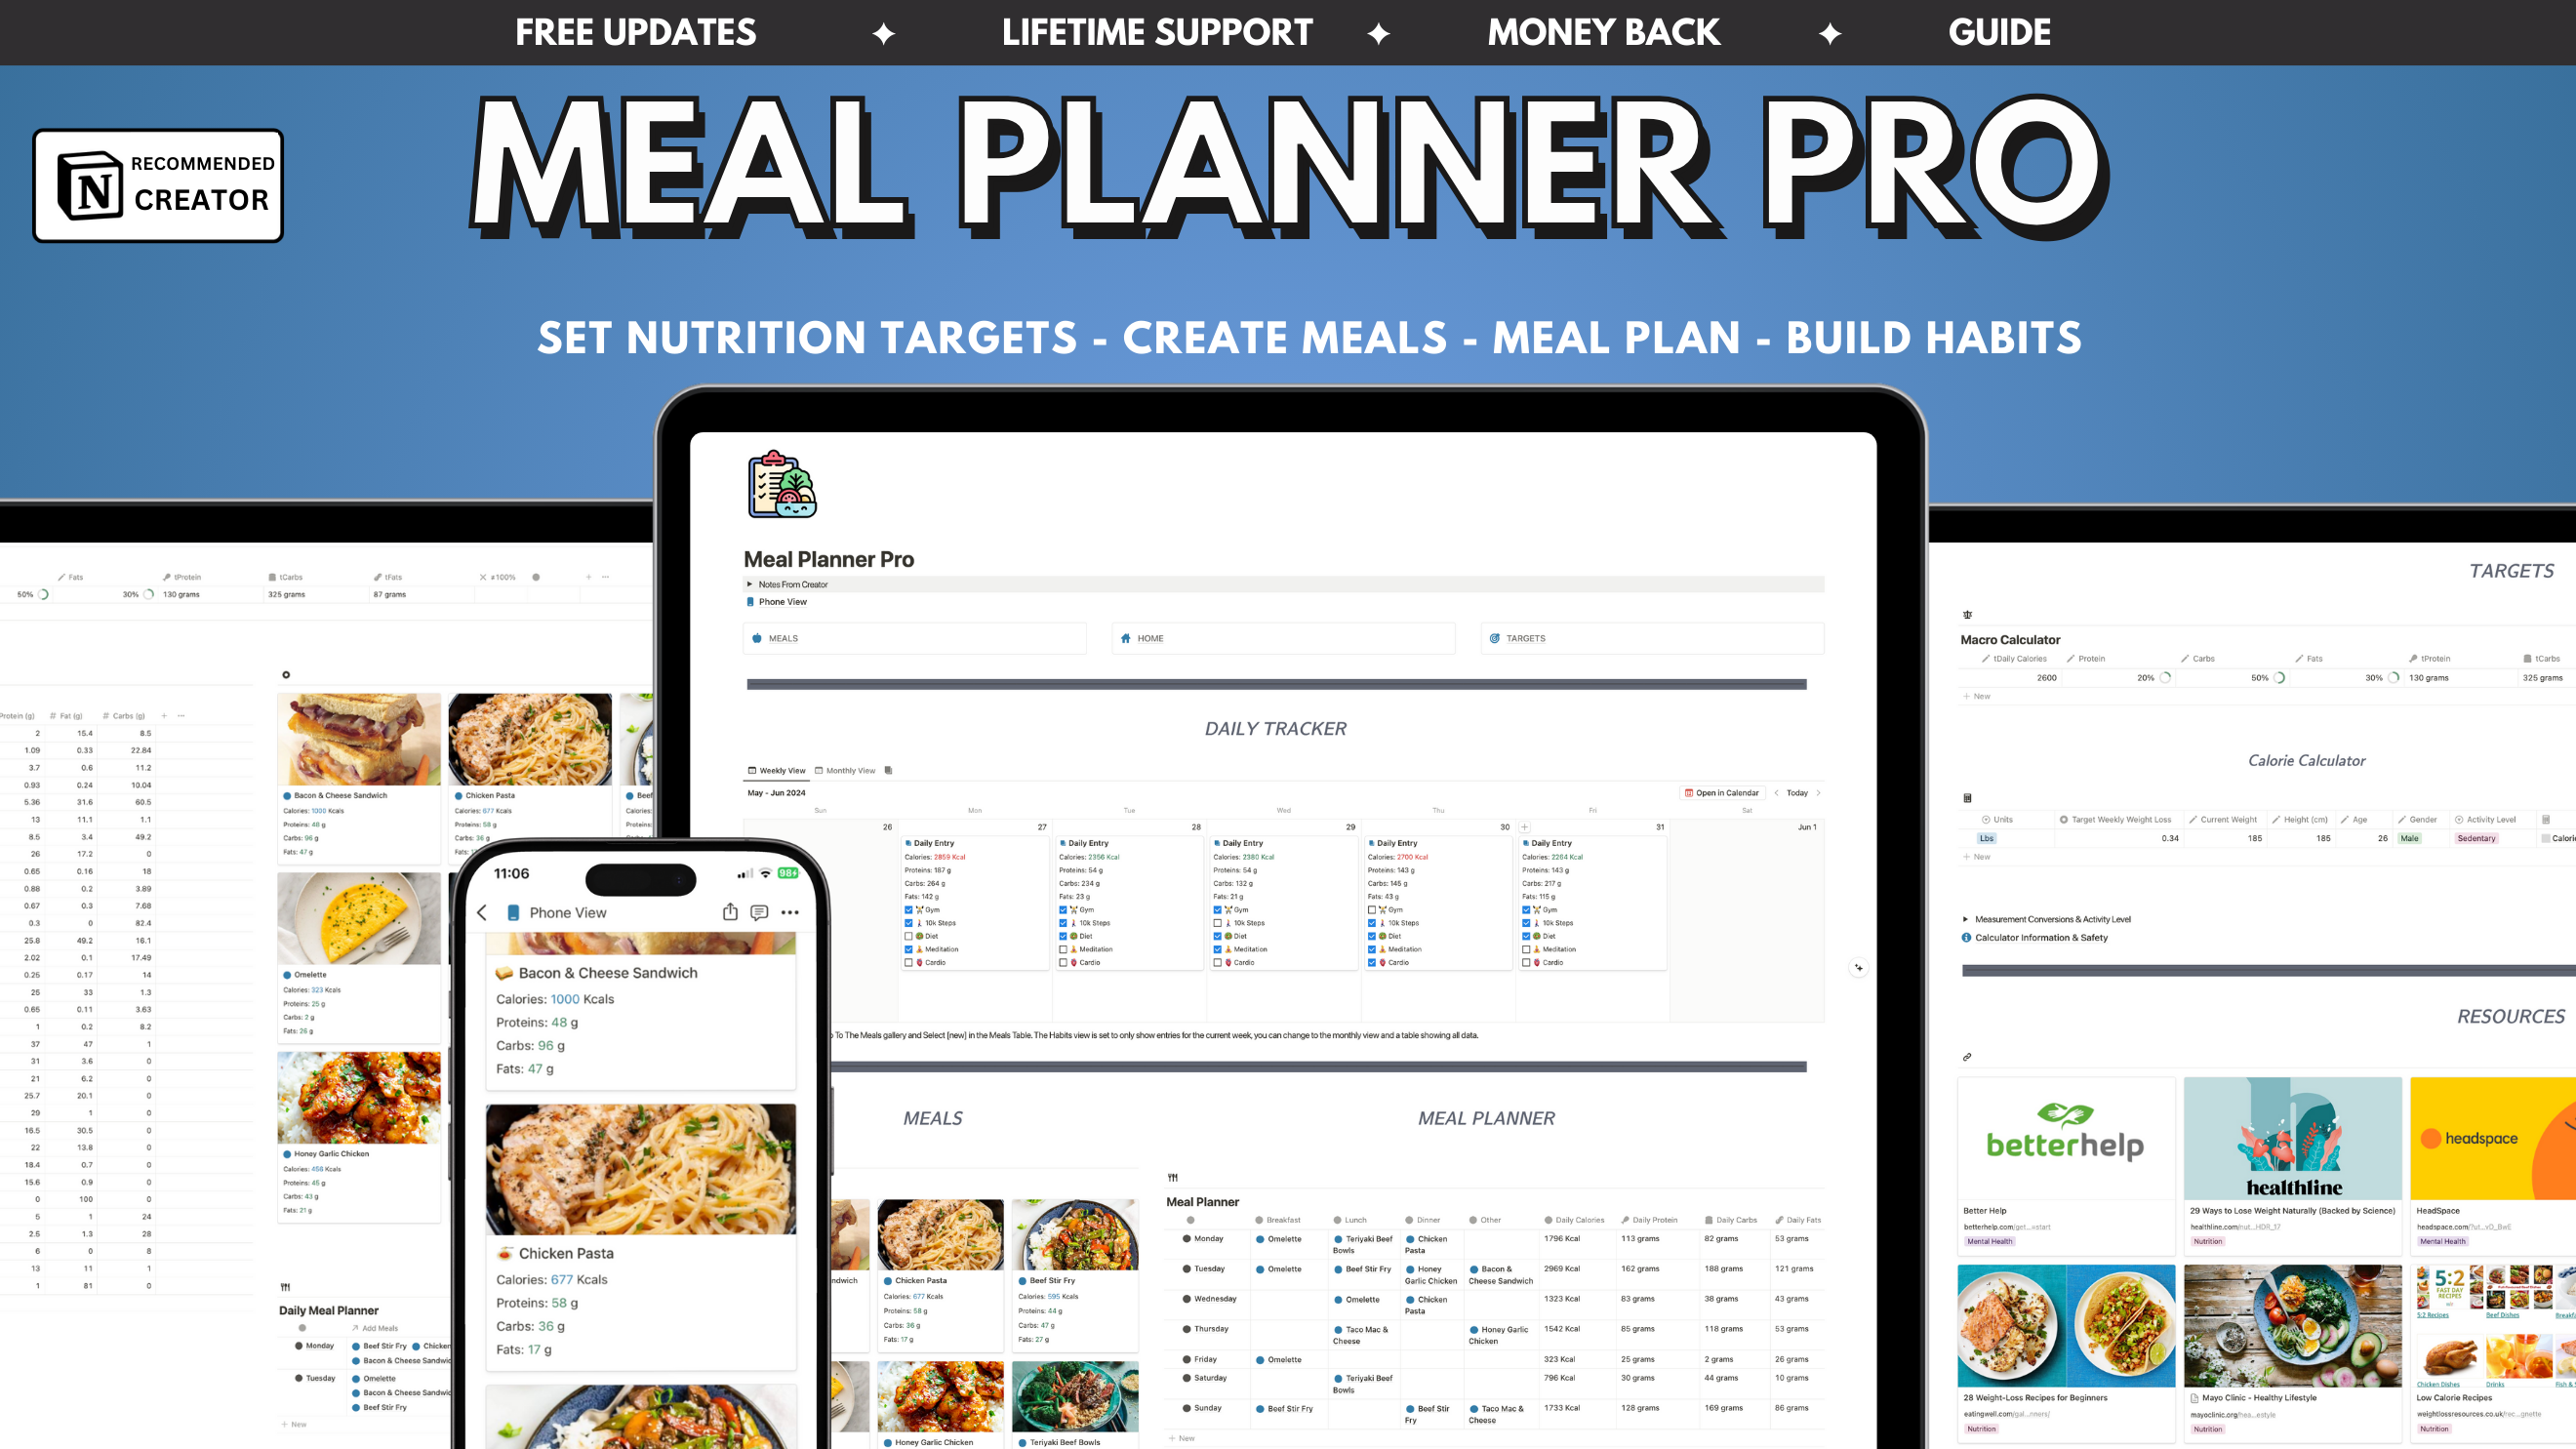 Notion Meal Planner Pro template. Create a database full of meals and be able to track their calories and macro levels. Set your calorie, protein, carbs & fats targets and be able to see what meals align with your goals. Take control of your nutrition and health today.

